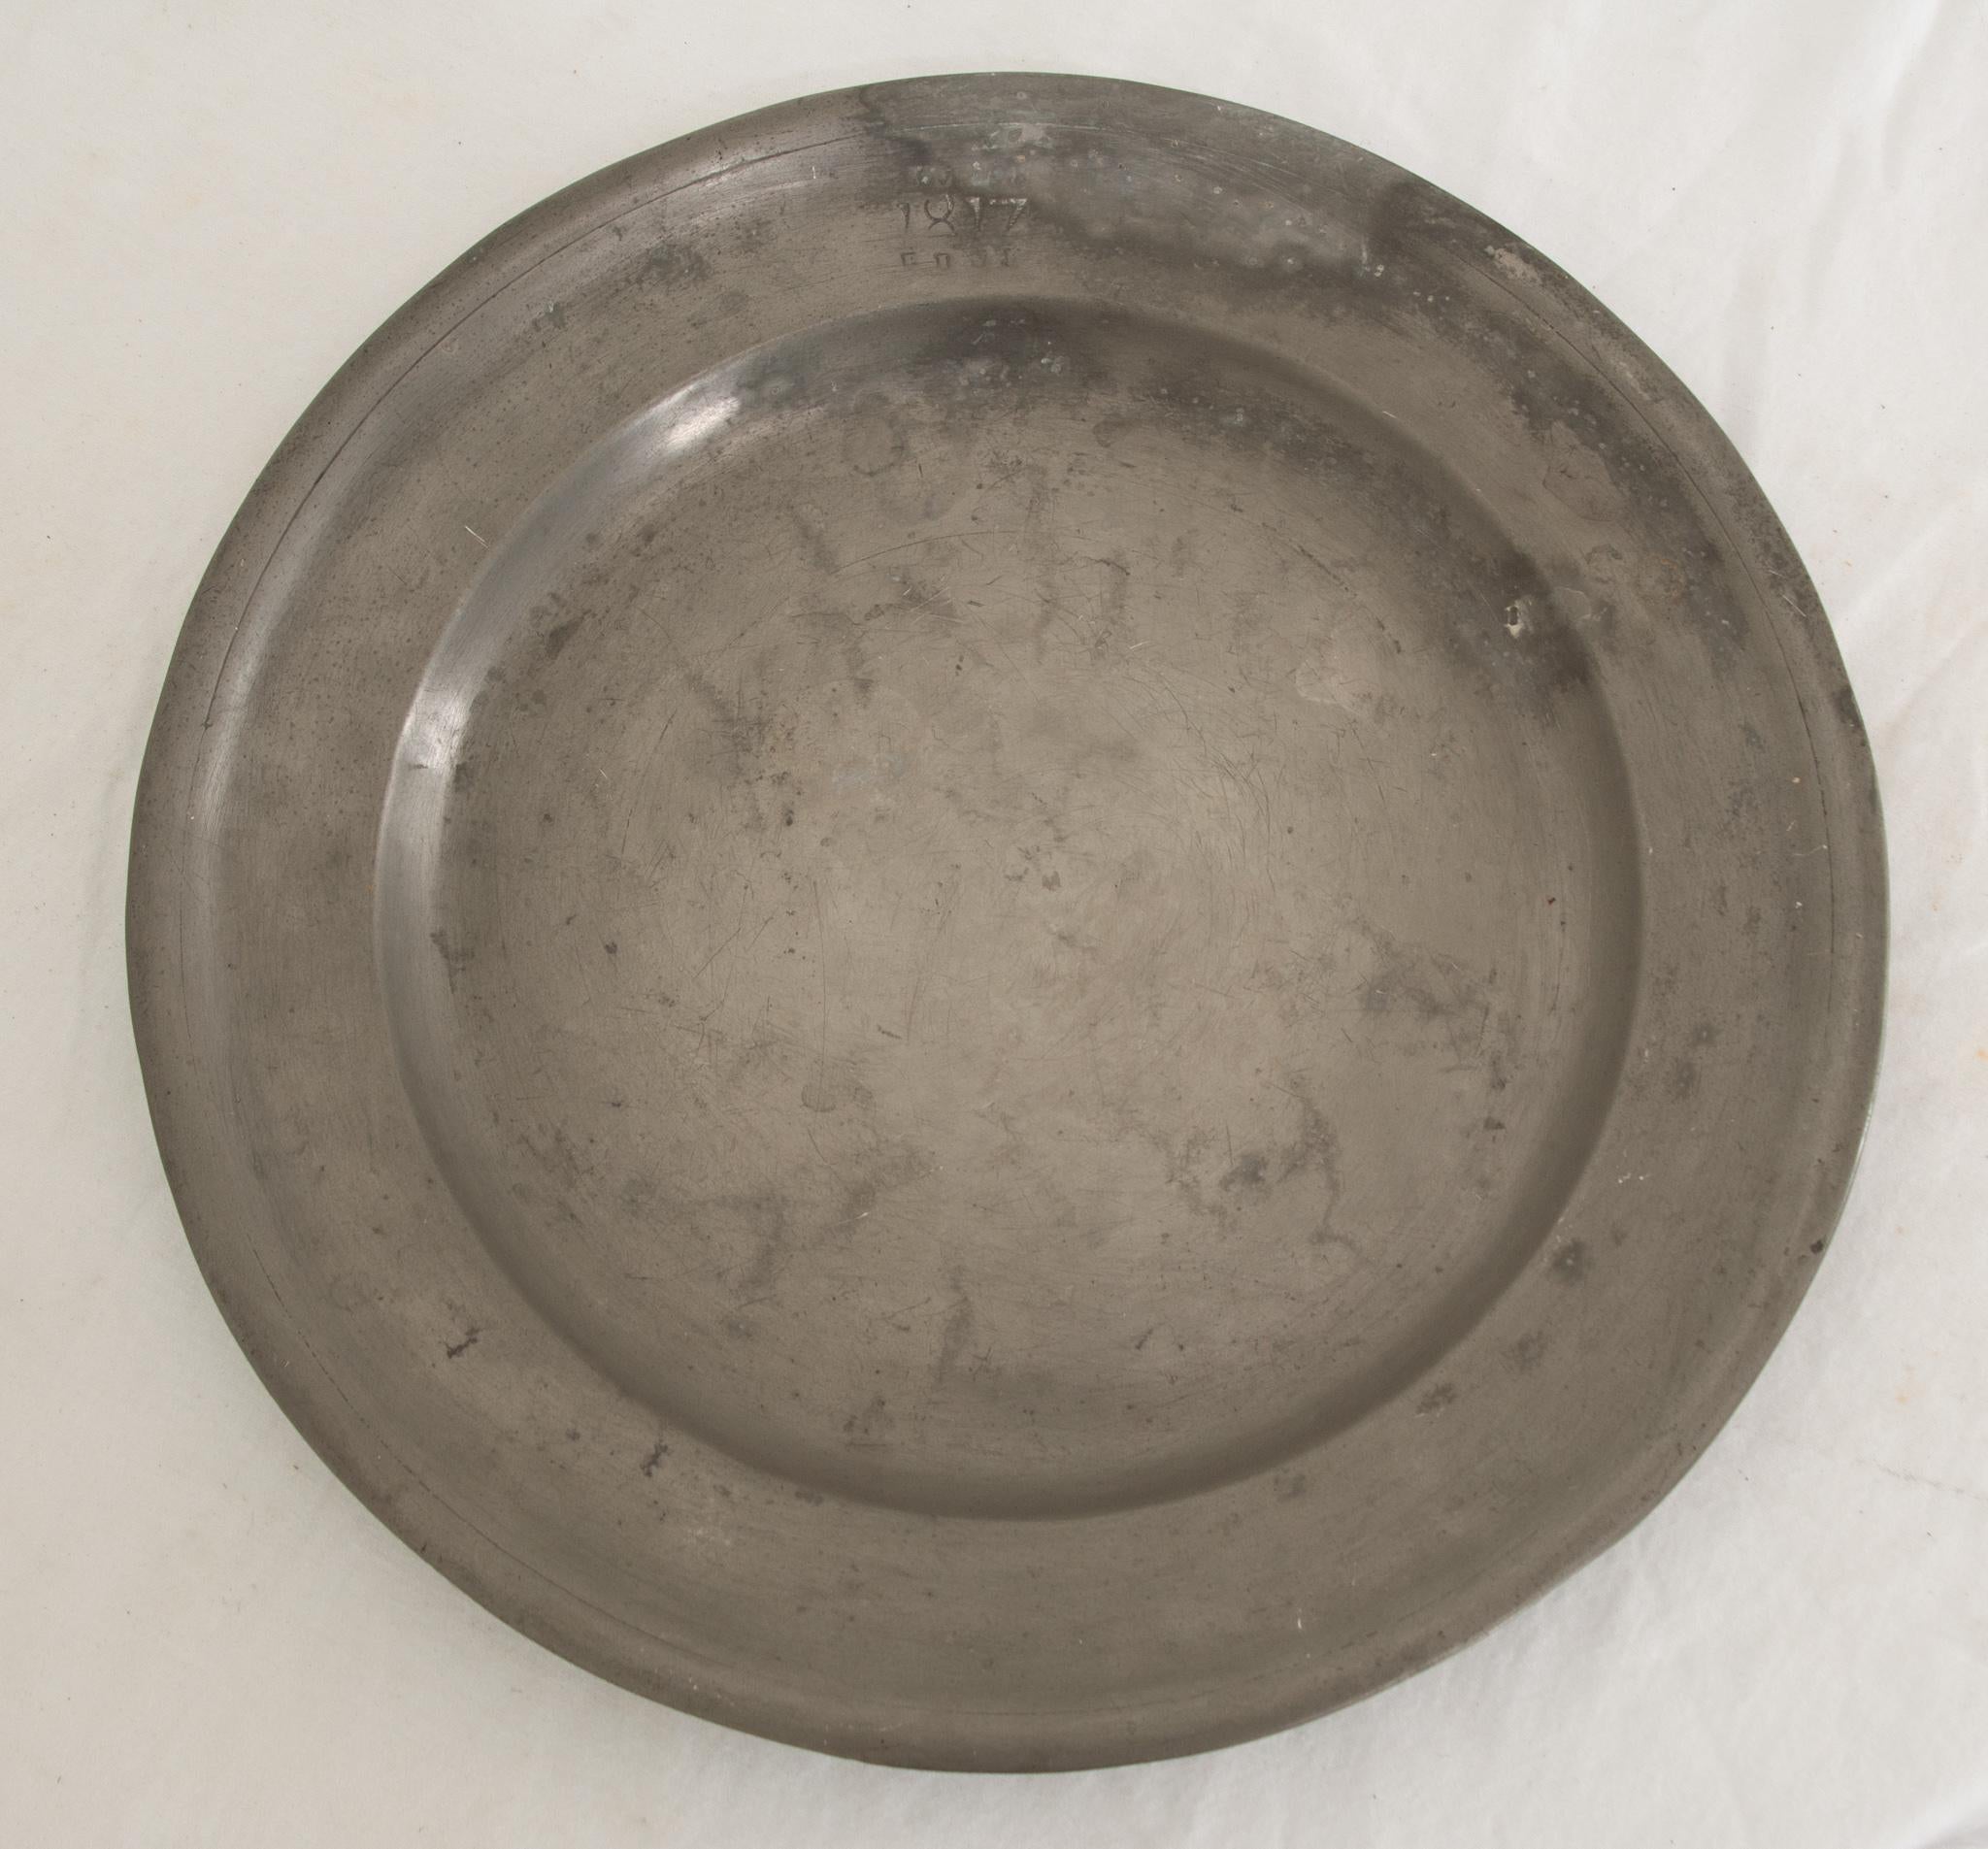 This large pewter plate from France is a wonderful culinary accessory dating from 1817. It has a fantastic patina and the perfect amount of wear. The date is etched into the top and the back showcases multiple stampings from the unknown pewterer.